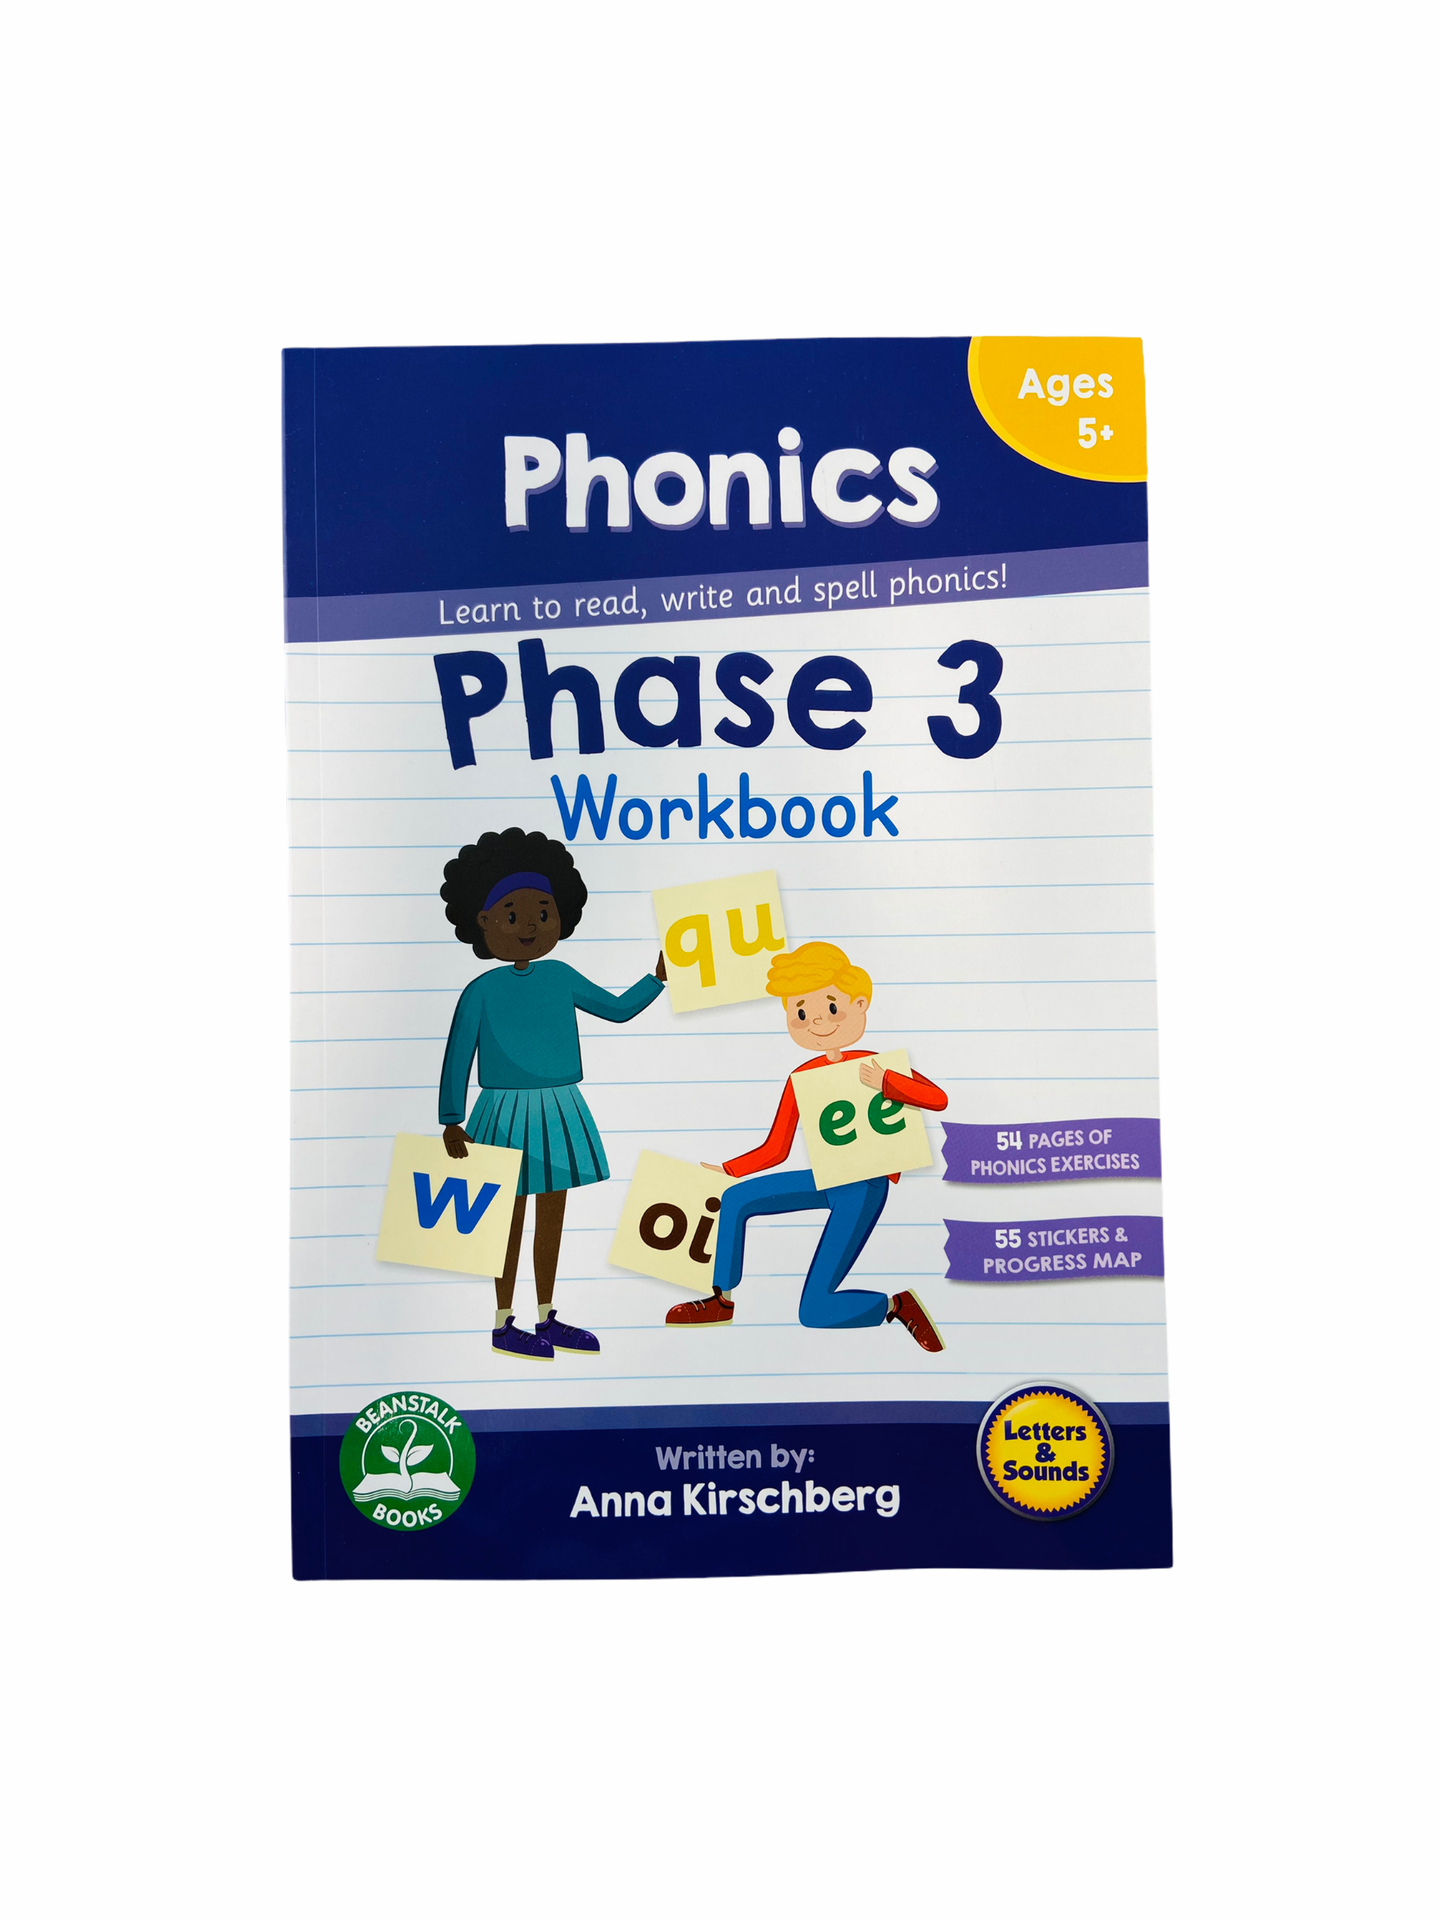 Phase 3 Workbook - Phonics with blue boarders showing girl and boy holding up letters